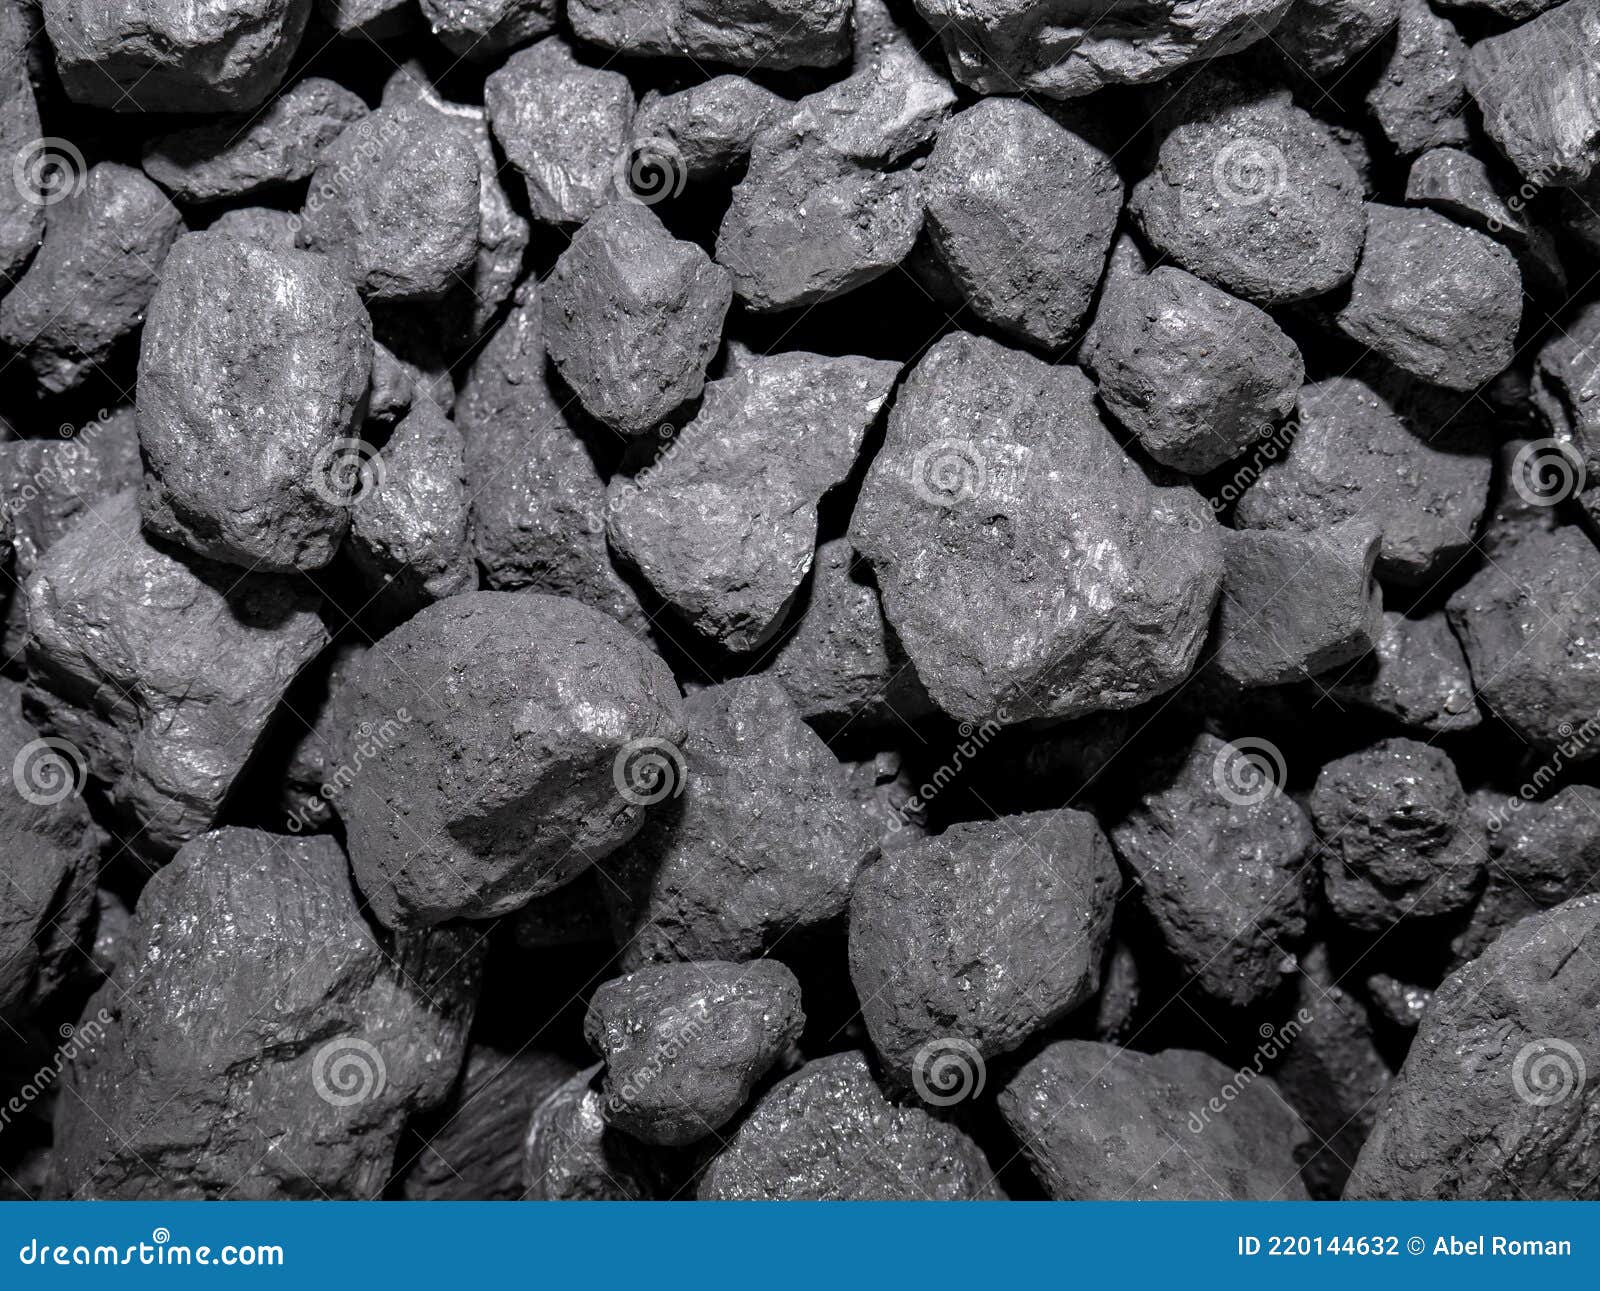 a pile of carbon stones piled up for later combustion, forming an energetic background of this precious mineral